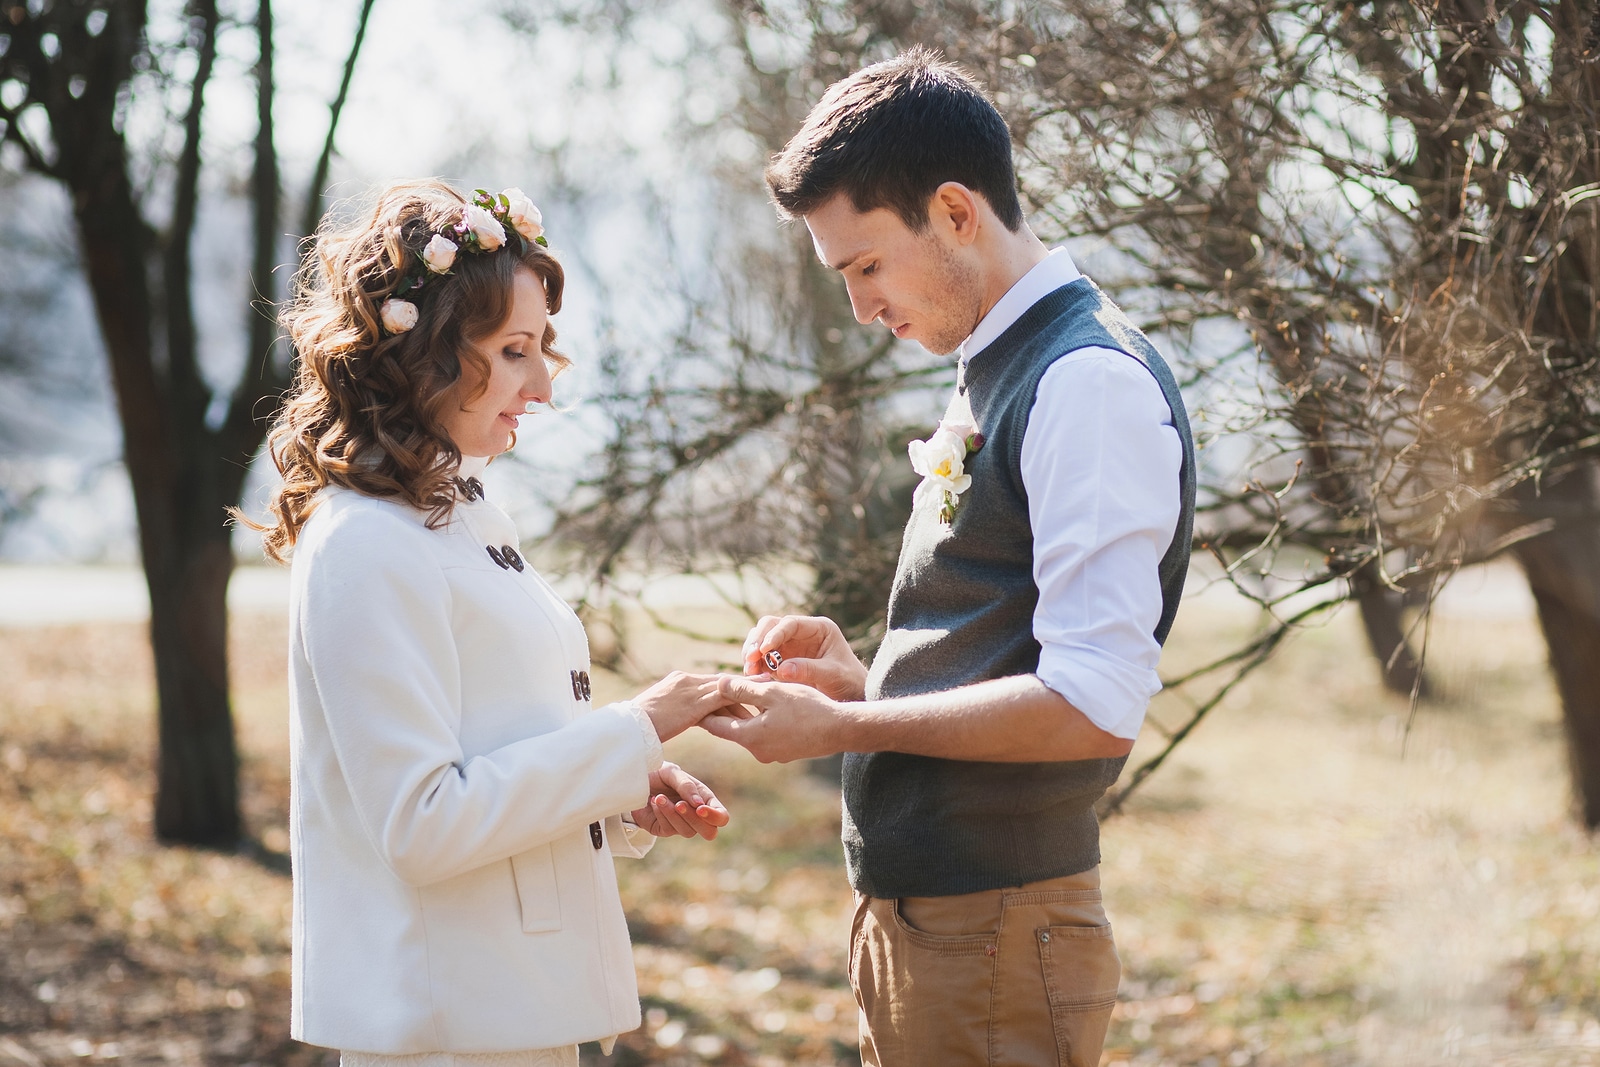 Bride and groom exchanging wedding rings. Wedding couple. People in love. Young man and beautiful woman in spring park. Marriage proposal. Outdoors wedding ceremony. Happy people